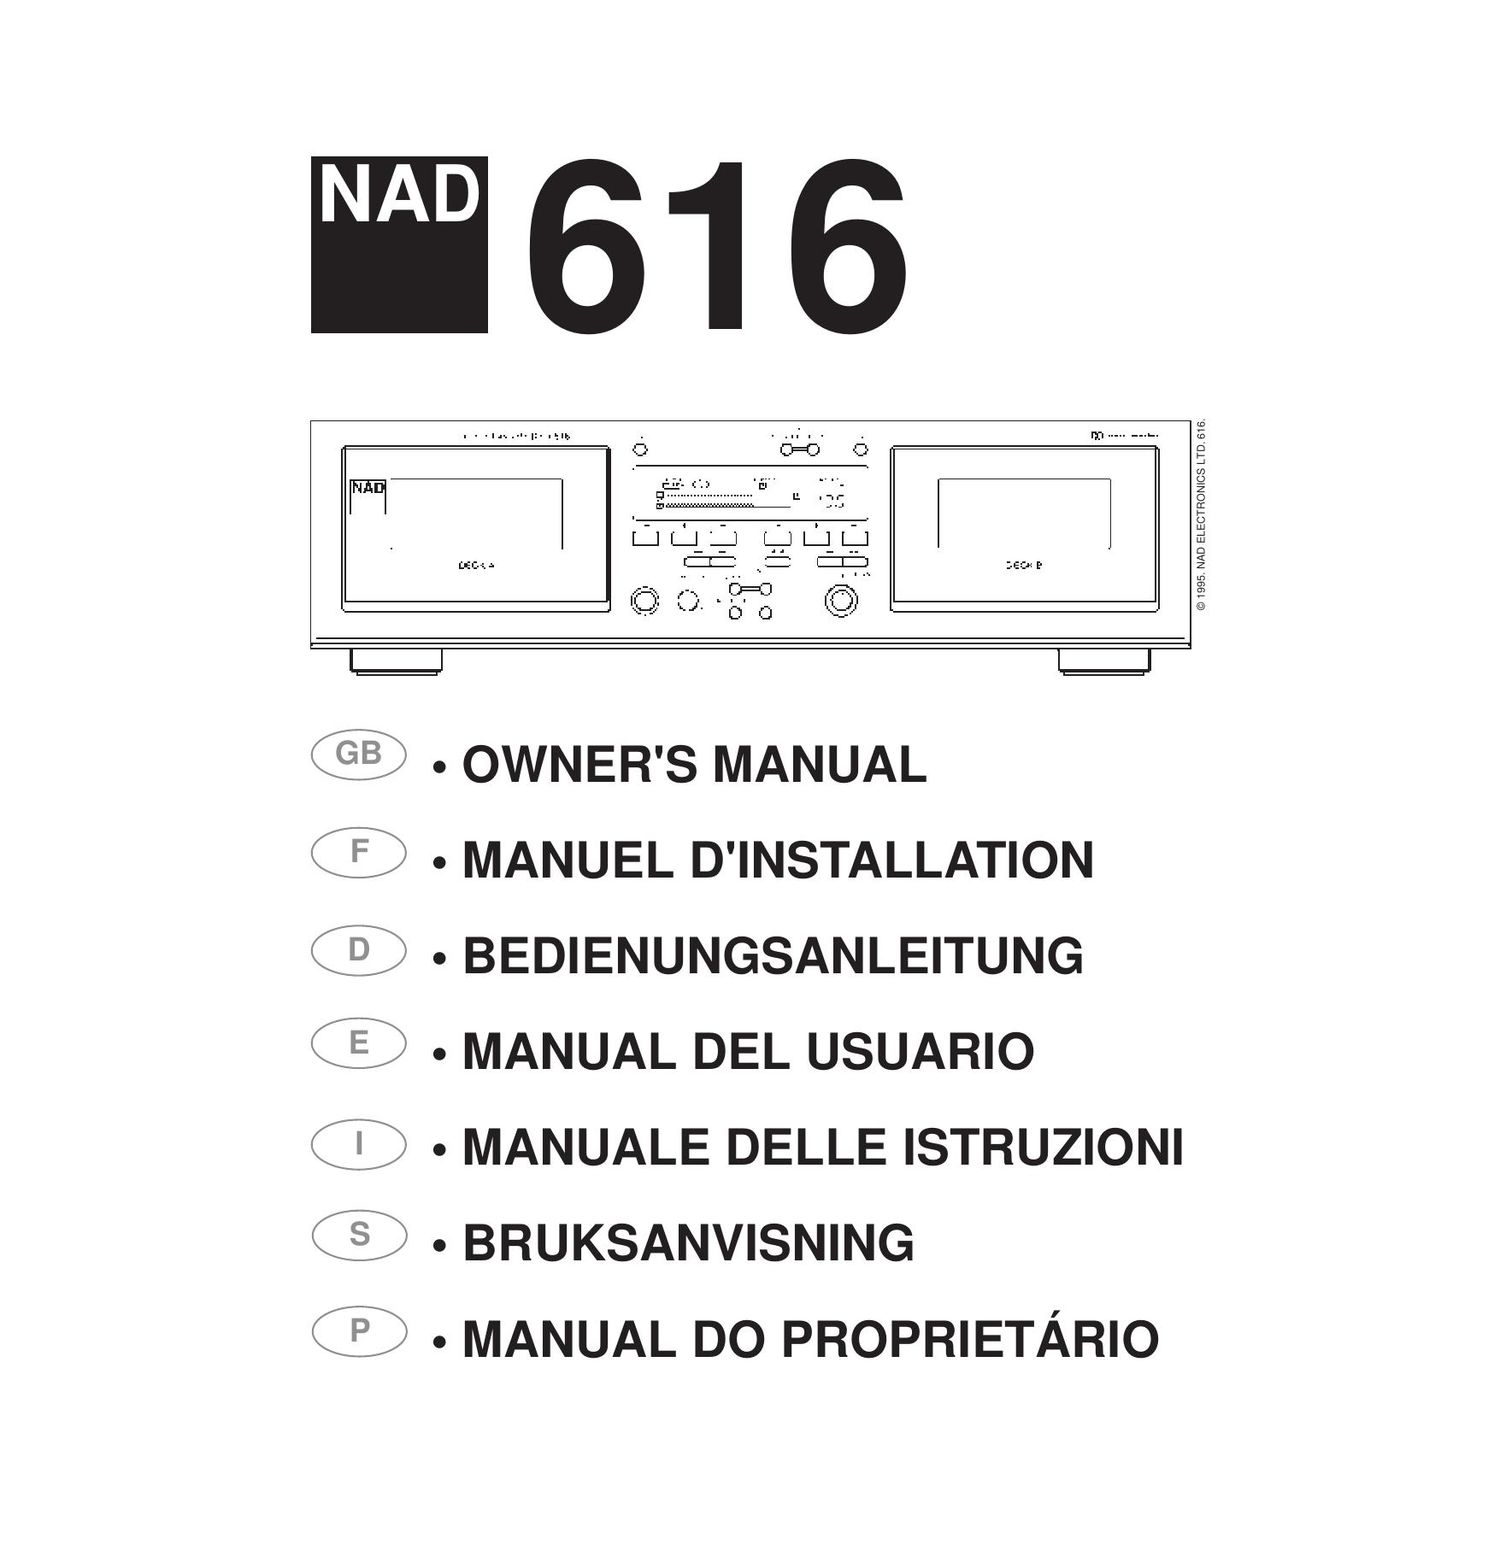 Nad 616 Owners Manual